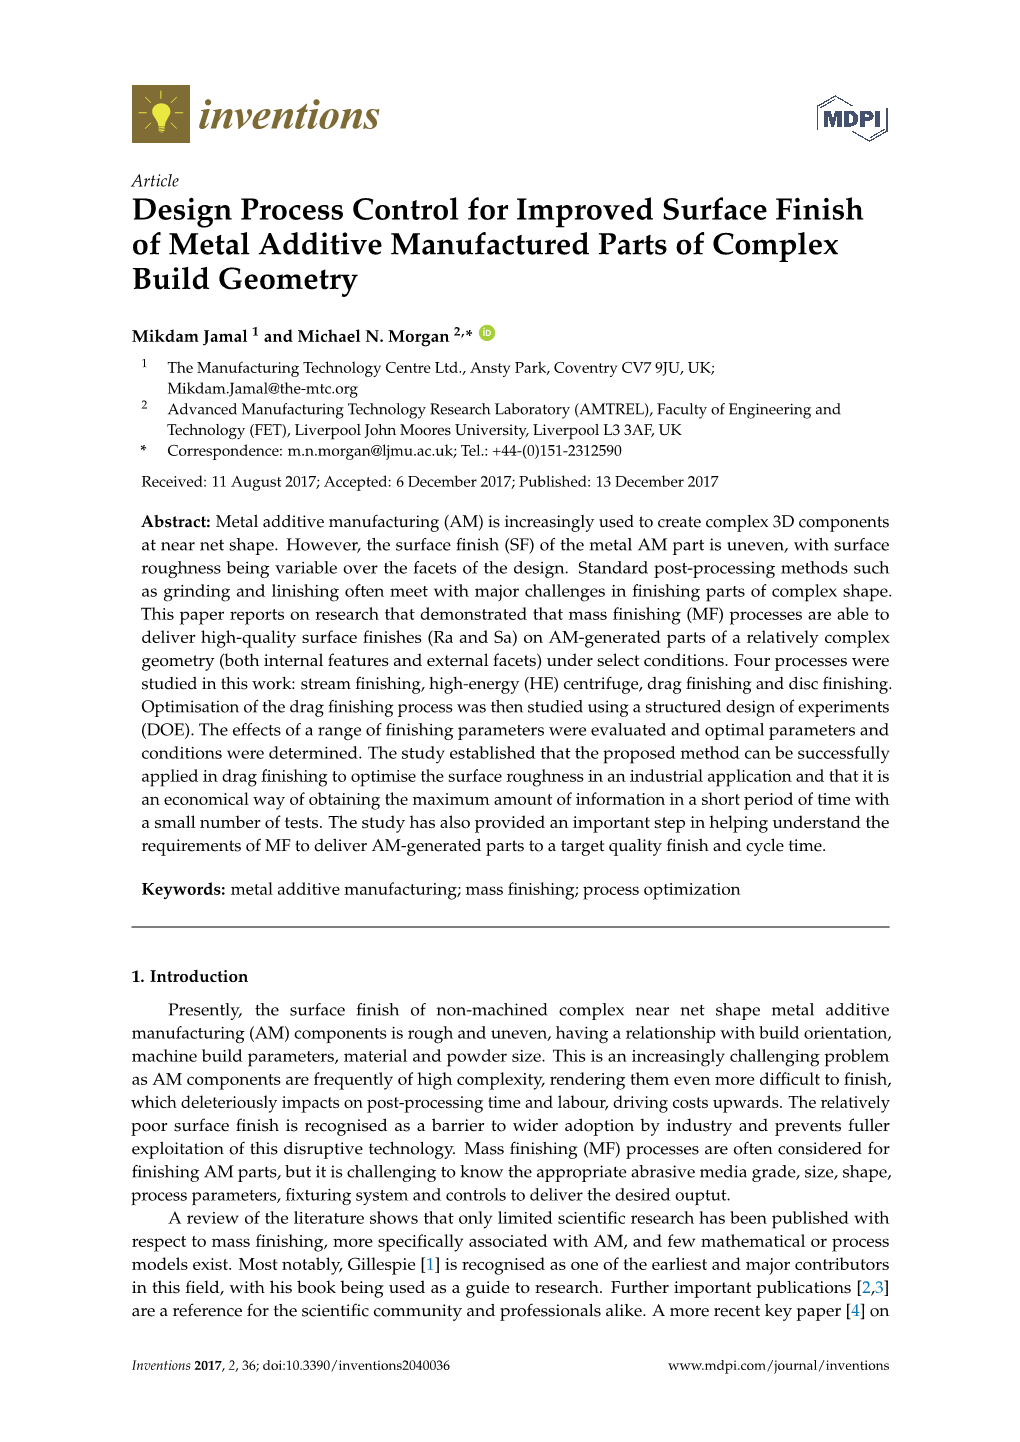 Design Process Control for Improved Surface Finish of Metal Additive Manufactured Parts of Complex Build Geometry